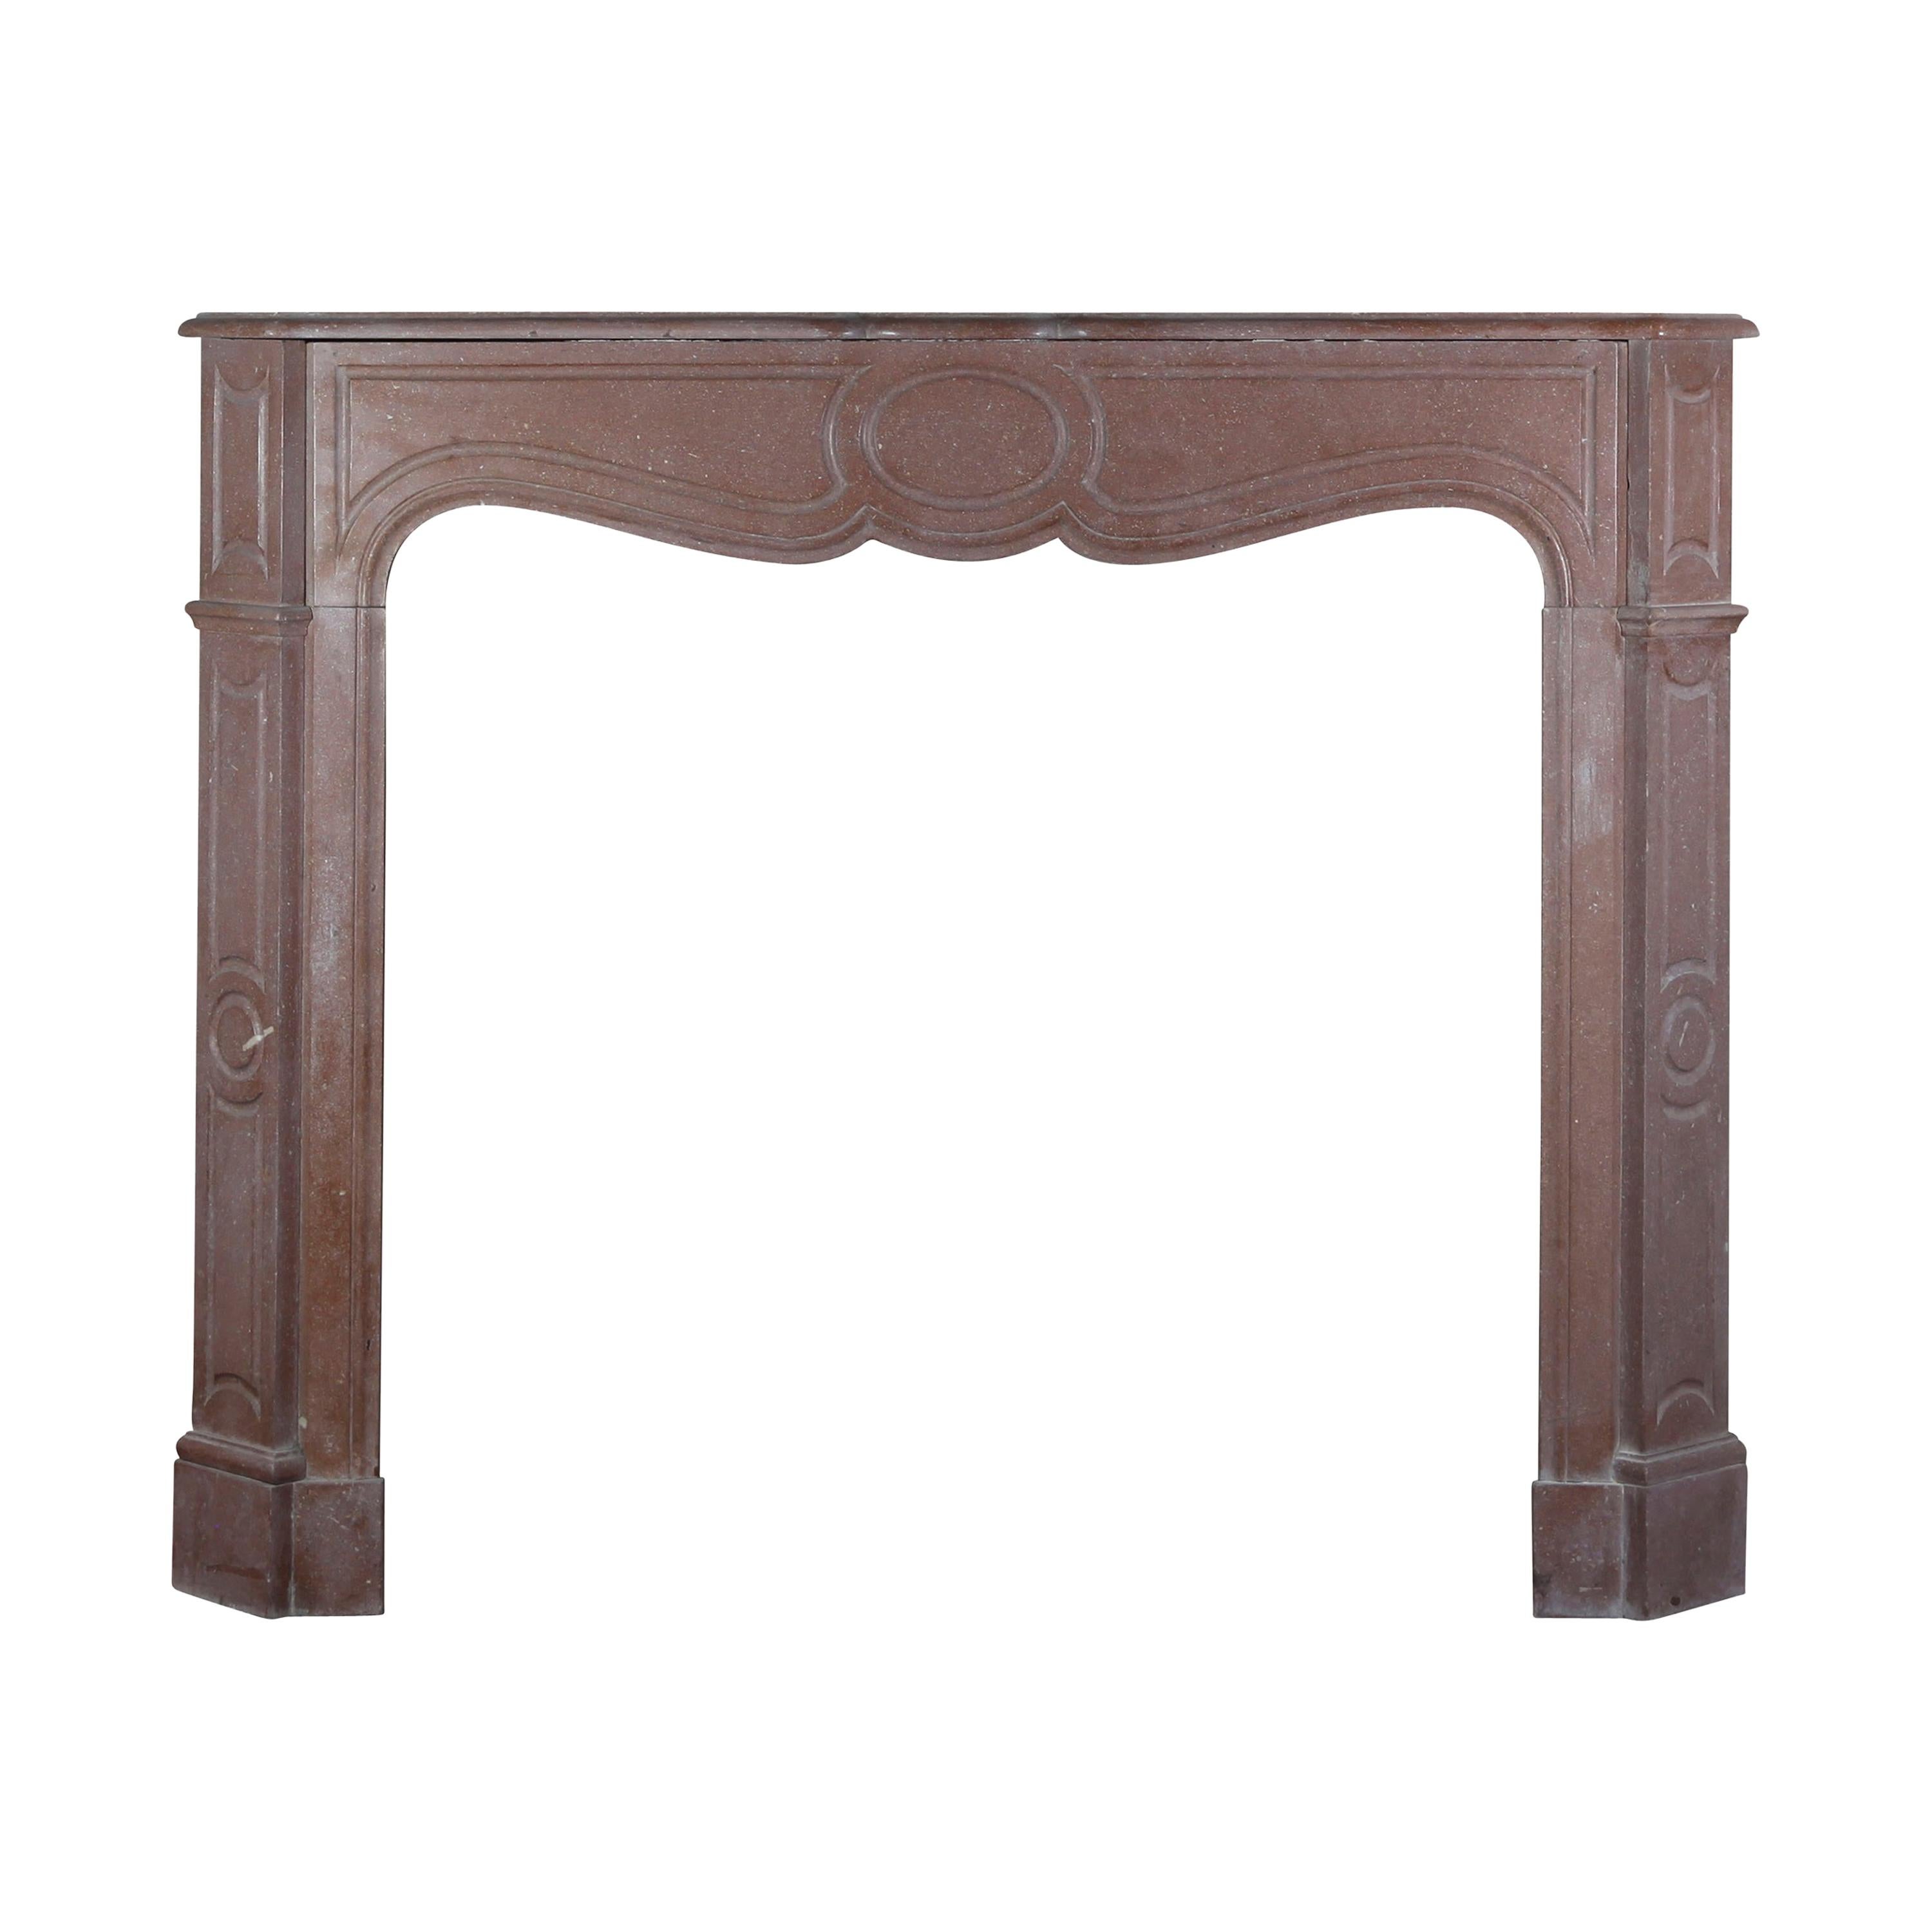 French Pompadour Style Vintage Fireplace Surround in Marble